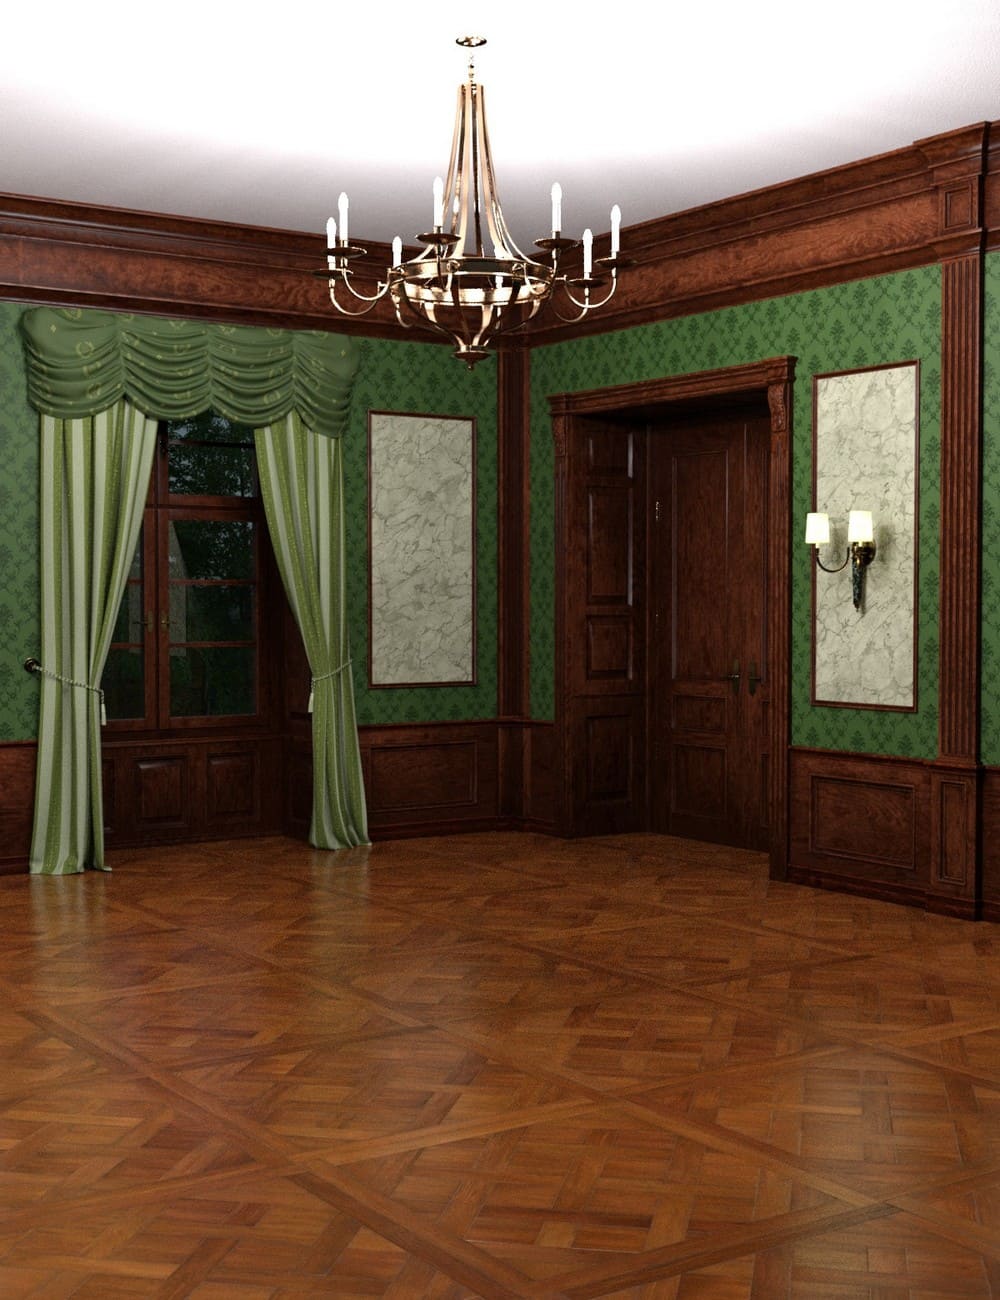 A Touch of Classicism Room_DAZ3D下载站